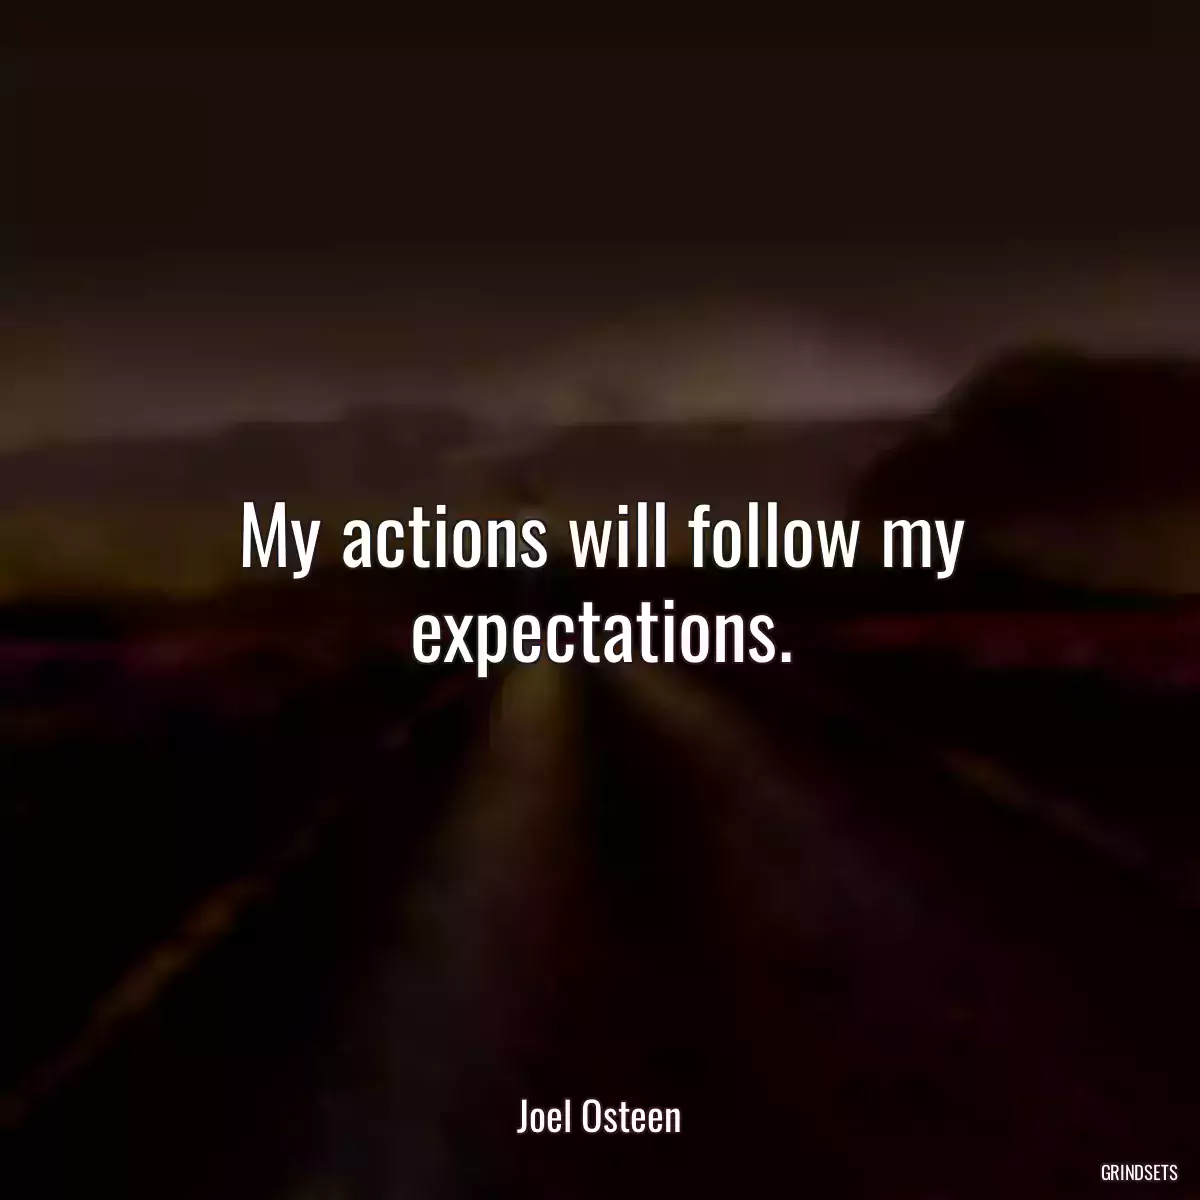 My actions will follow my expectations.